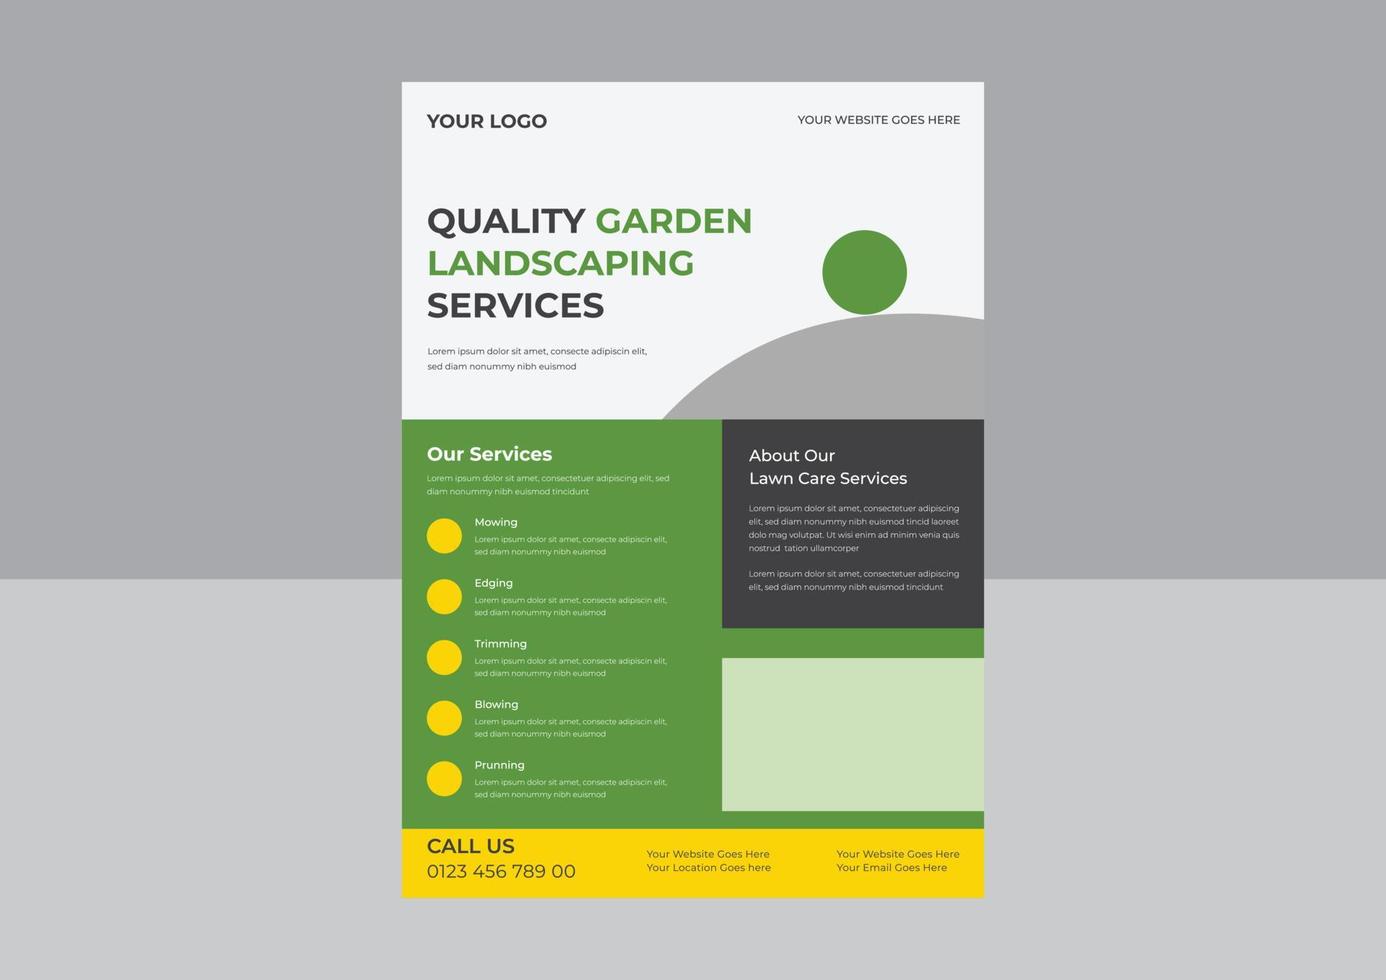 Lawn Mower Garden or Landscaping Service Flyer Template, Business Flyer poster pamphlet brochure cover design layout background, Tree and gardening service poster leaflet design. vector